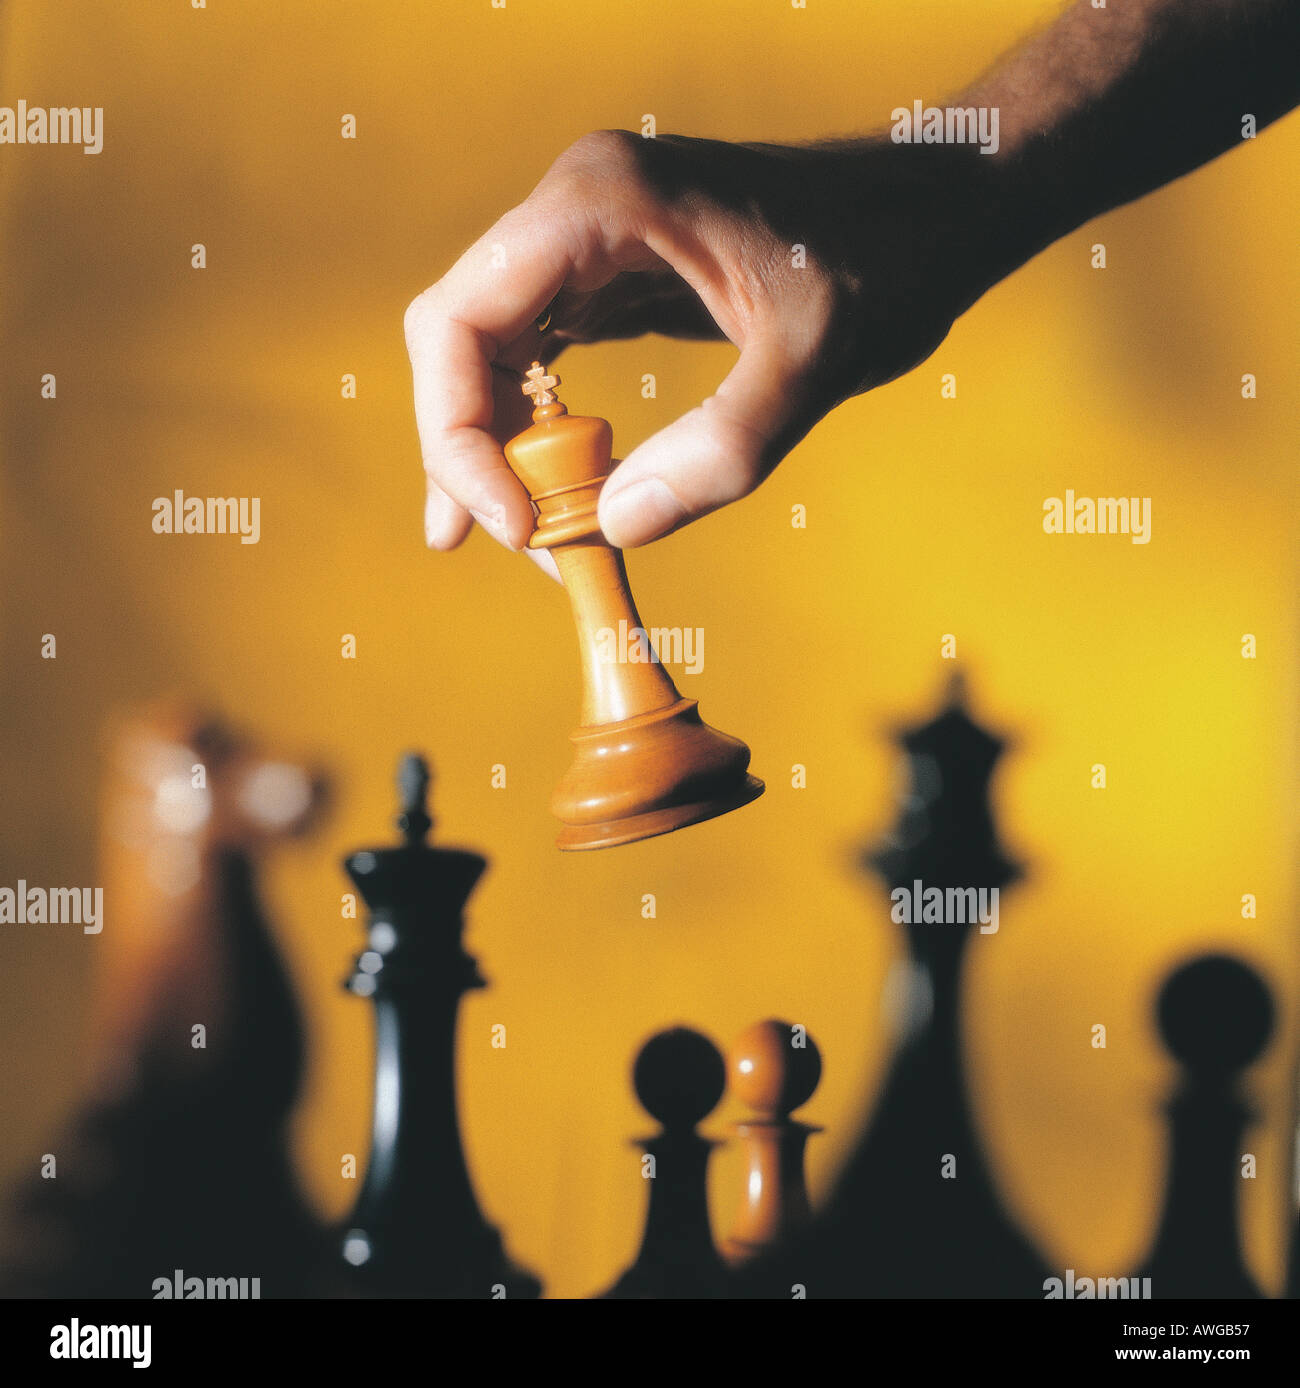 A hand holding a chess piece Stock Photo